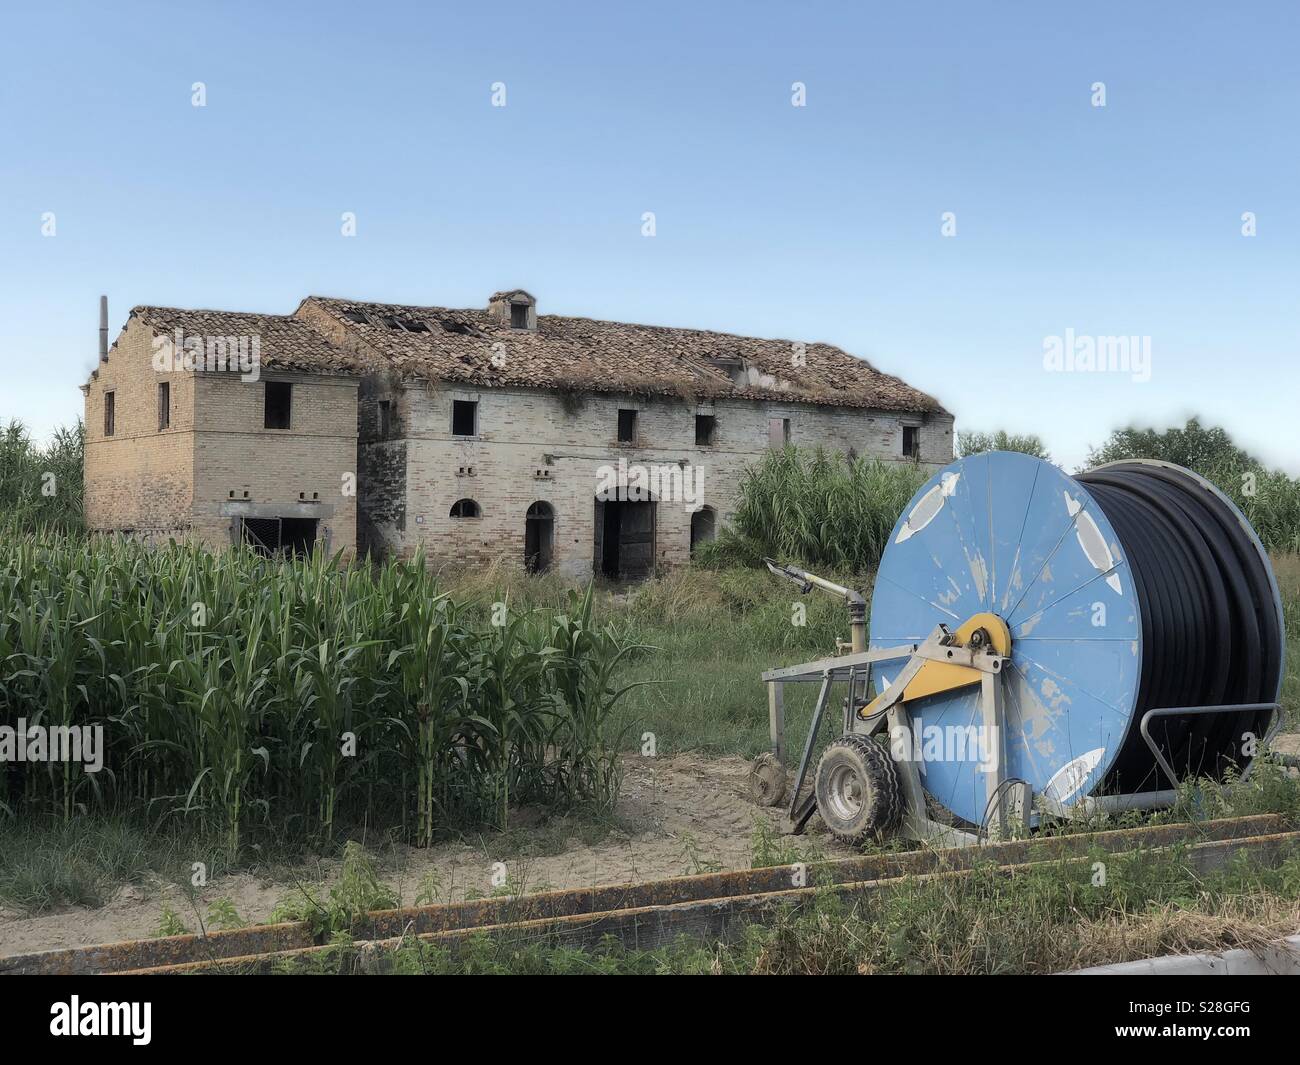 Irrigation machine front of a typical marche region country house abandoned in the Natural Park of Sentina, Italy Stock Photo